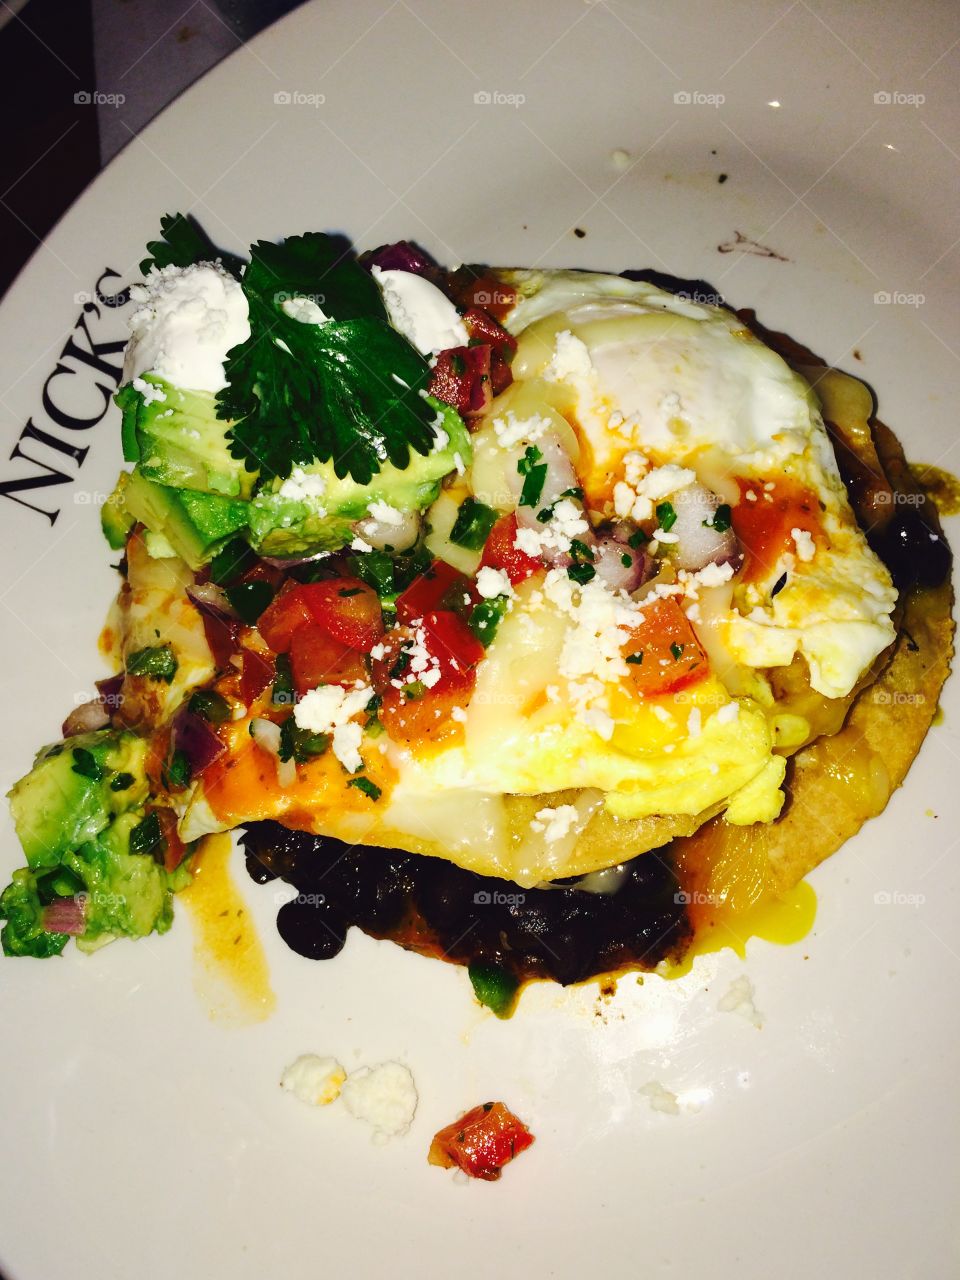 Juevos Rancheros at Nick's . Met up with two girlfriends that I haven't seen in years at Nick's in Manhattan Beach. It was delicious. 